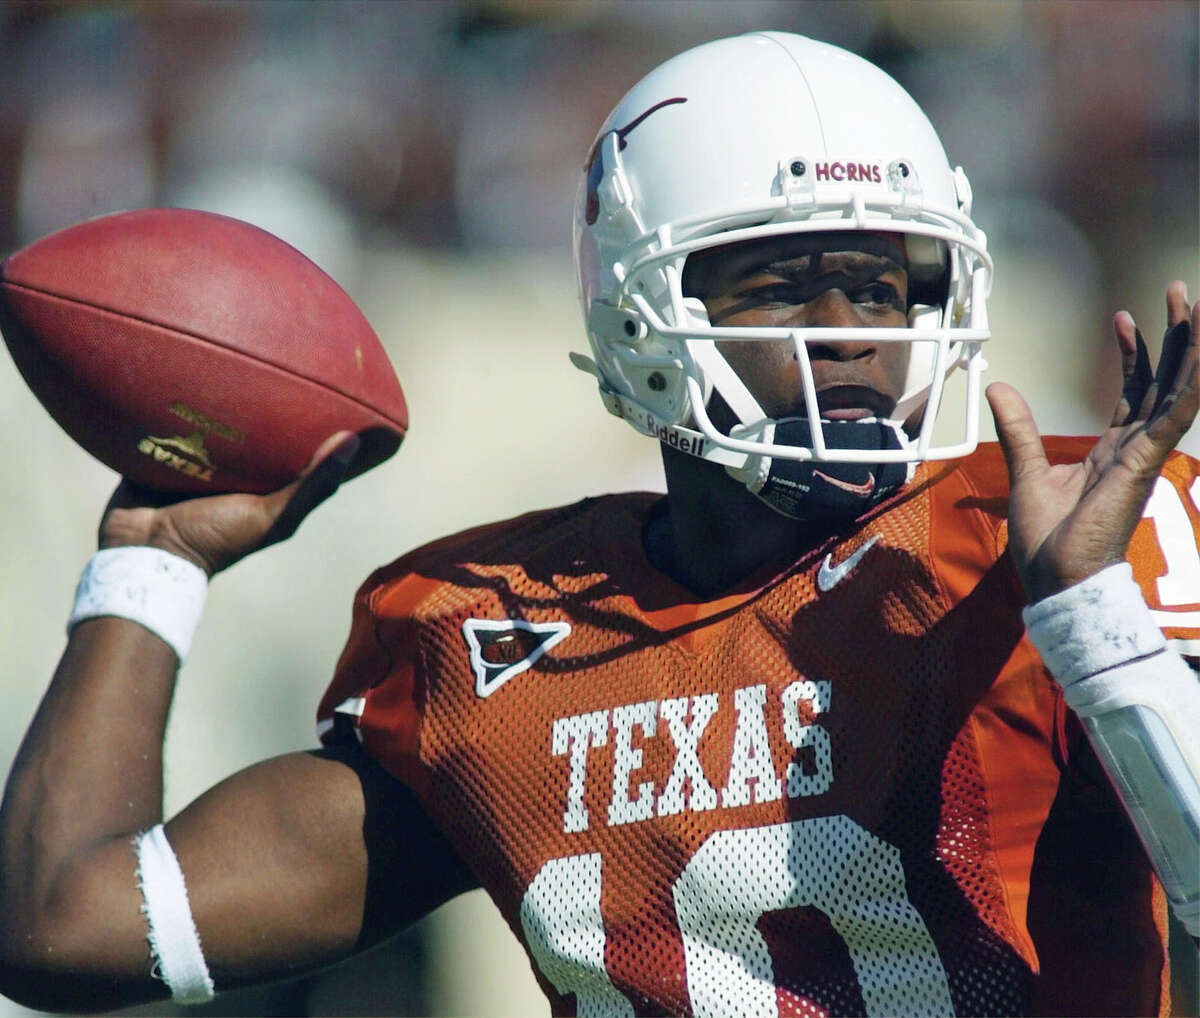 FILE - In a Oct. 16, 2004 file photo, Texas quarterback Vince Young looks for a receiver during the second quarter of Texas' 28-20 victory over Missouri in Austin, Texas. When the Big 12 kicks off its football media days on Monday, July 17, 2017, commissioner Bob Bowlsby will be able to tout a winning record in bowl games last season and the still-growing revenue for the leagueÂ?’s 10 schools. What the league really needs this season is to get a team into the College Football Playoff. (AP Photo/Harry Cabluck, File)